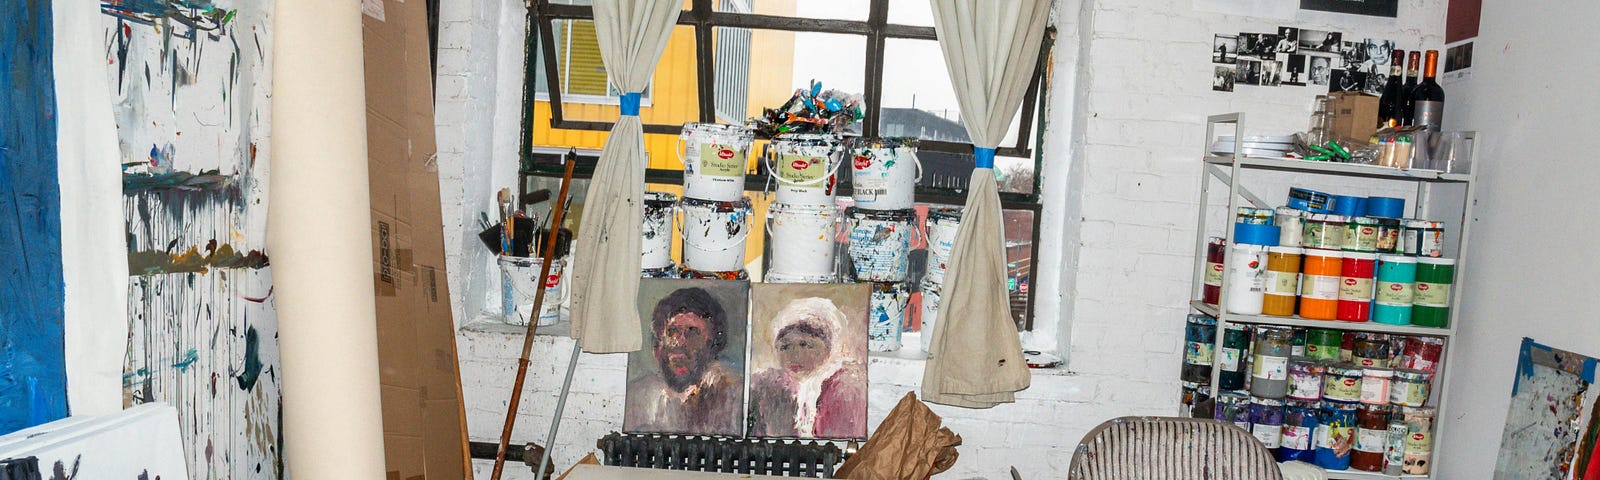 A camera shot of a room with painted canvases leaning on the walls on either side, paint spattered on the floor, cans of paint stacked on the windowsill straight ahead, a shelving unit of paint bottles on the right, and in front of the window, a short table with two portrait paintings, one of a man, and one of a woman.